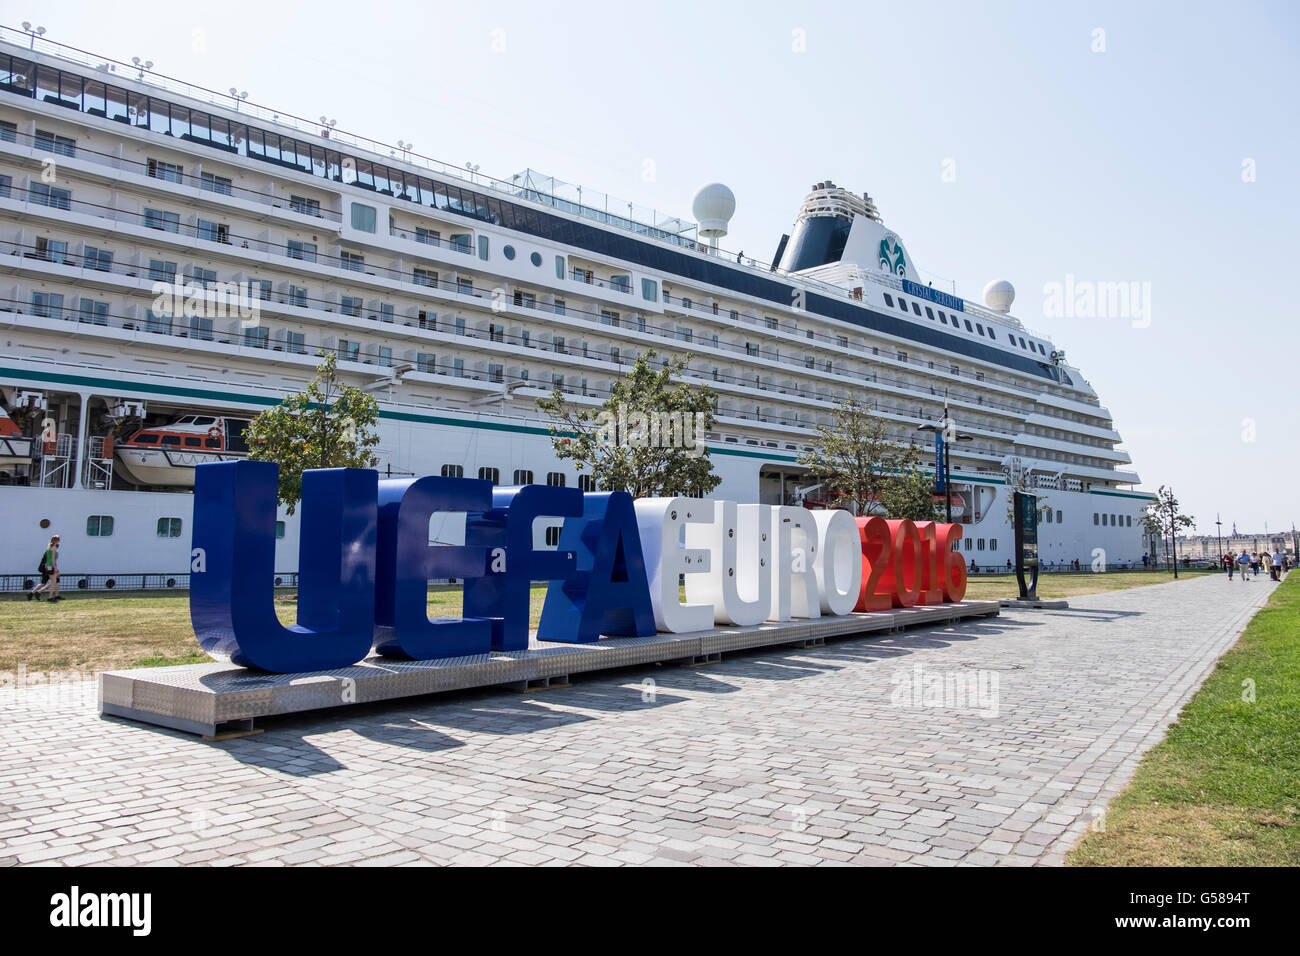 BORDEAUX, FRANCE - 16 JULY 2015 - The magnificent Crystal Serenity cruise ship is docked on the river Gironde in the heart of Bo Stock Photo